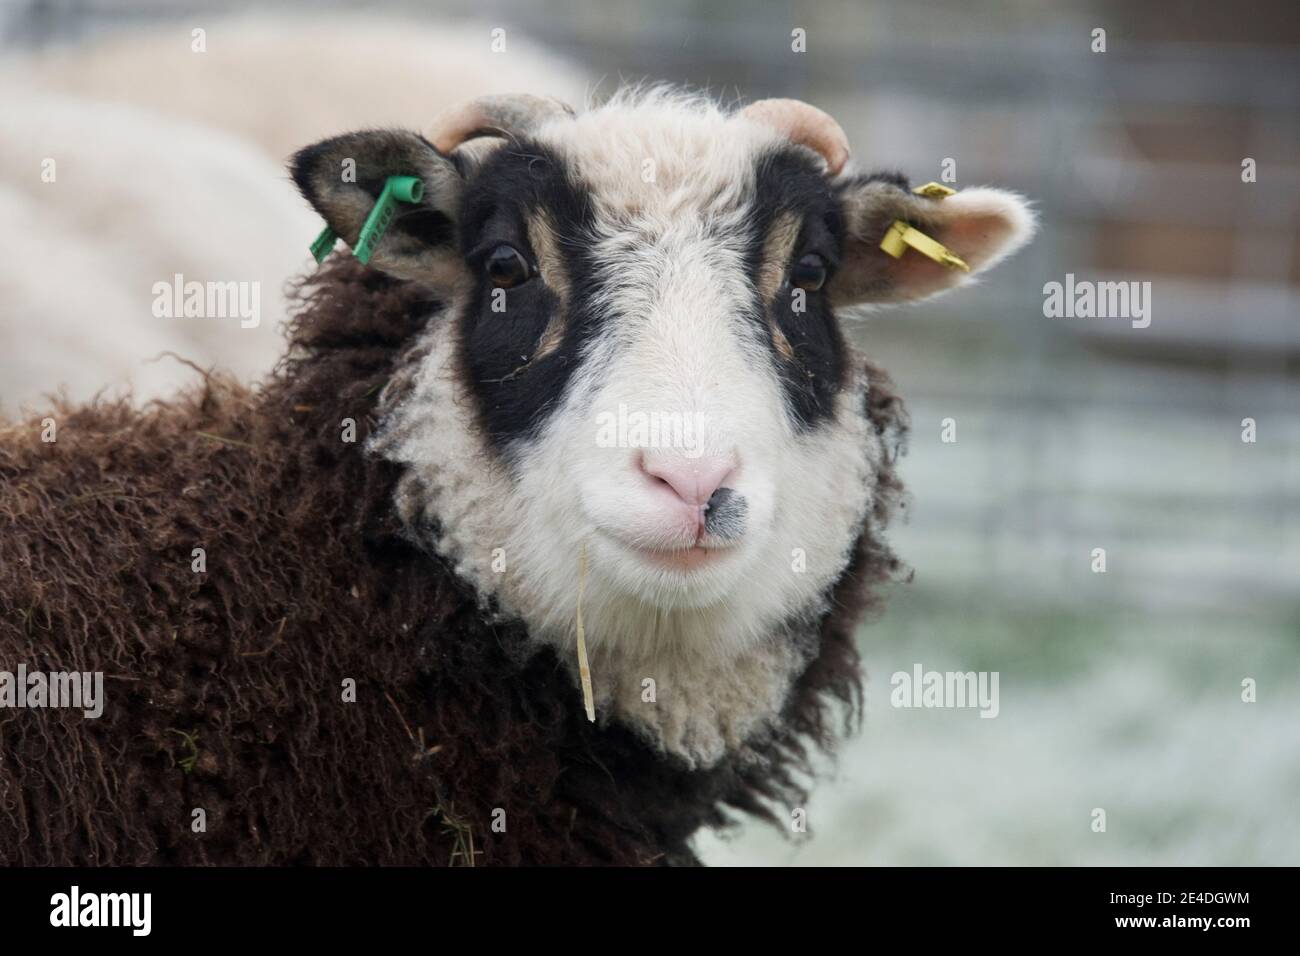 Yearling Shetland lamb together with white eye 'patches', white face and ear tags on a cold morning, Berkshire, January Stock Photo